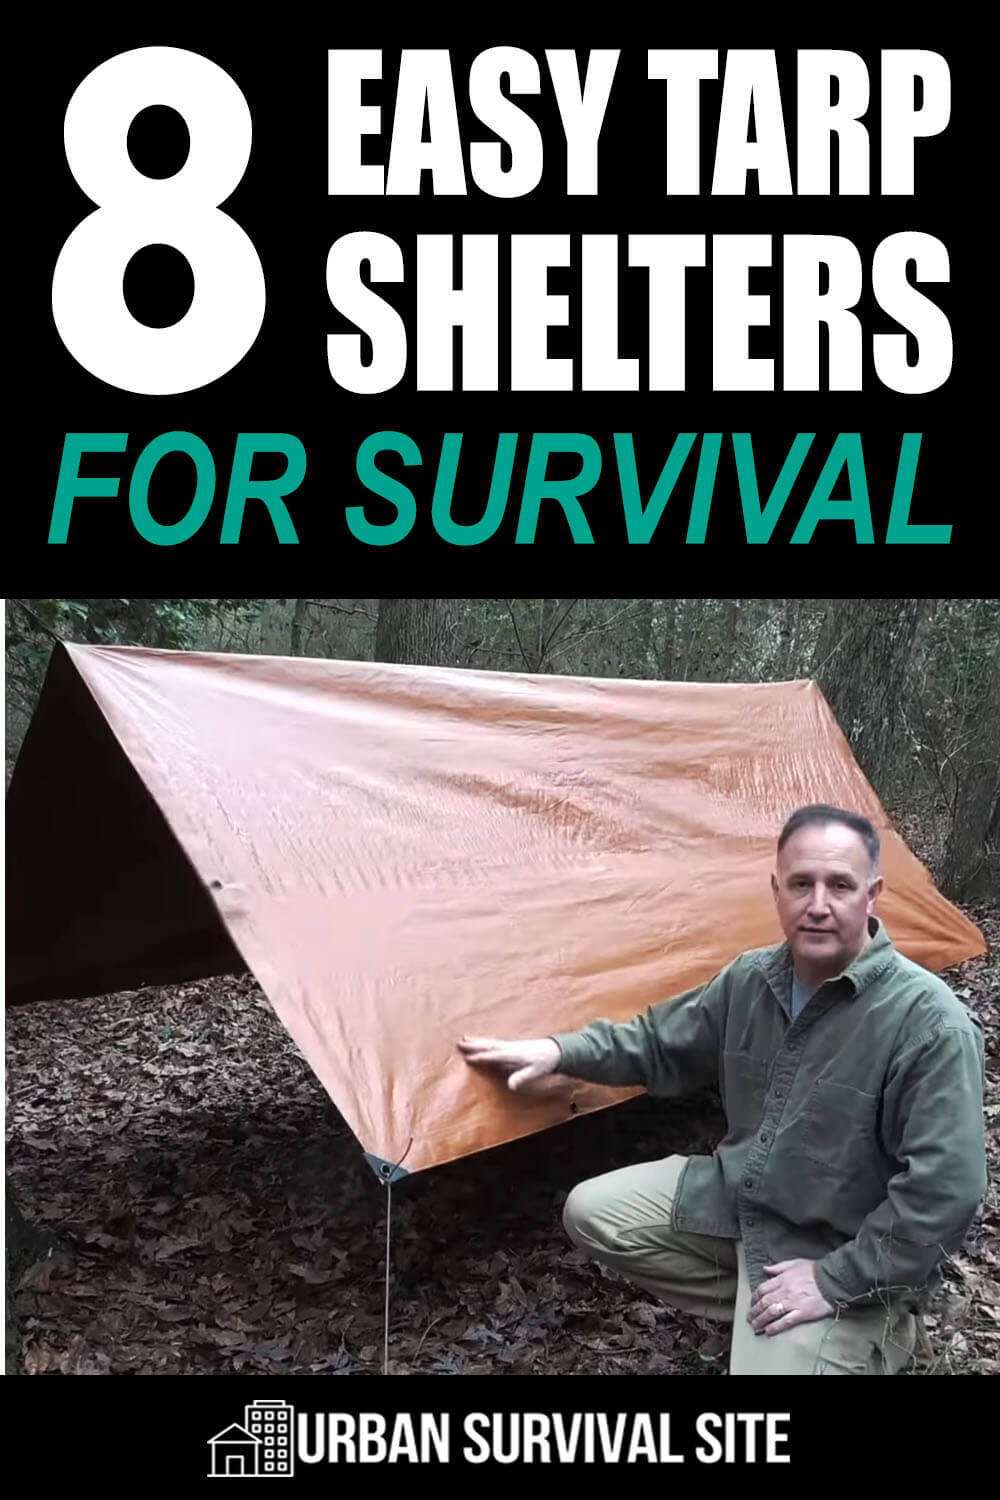 8 Easy Tarp Shelters for Survival